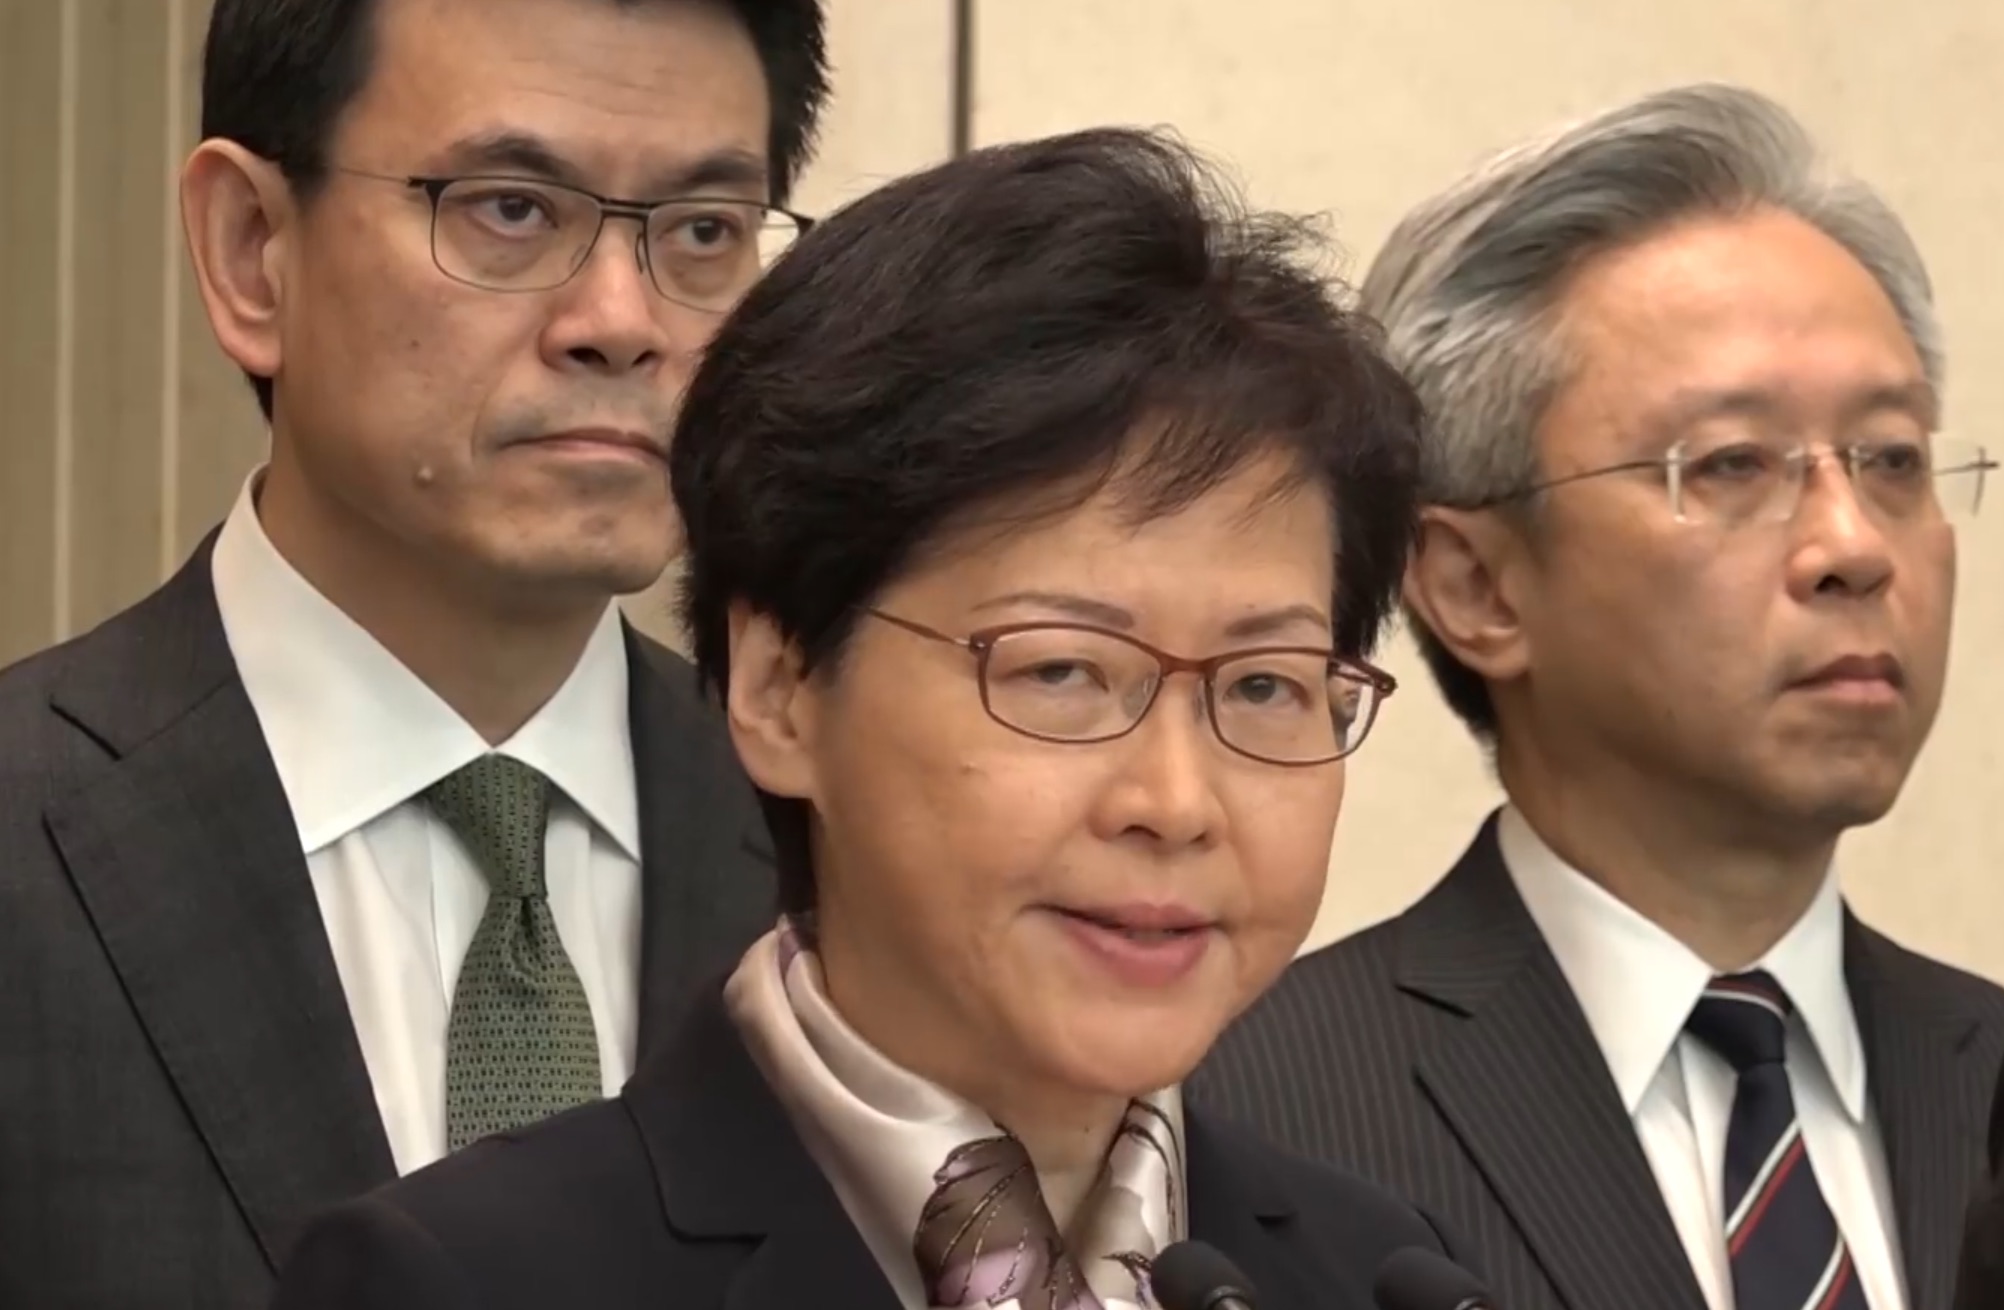 Hong Kong Chief Executive Carrie Lam speaks to the press on Monday about the city’s ongoing unrest. Screengrab via RTHK livestream.